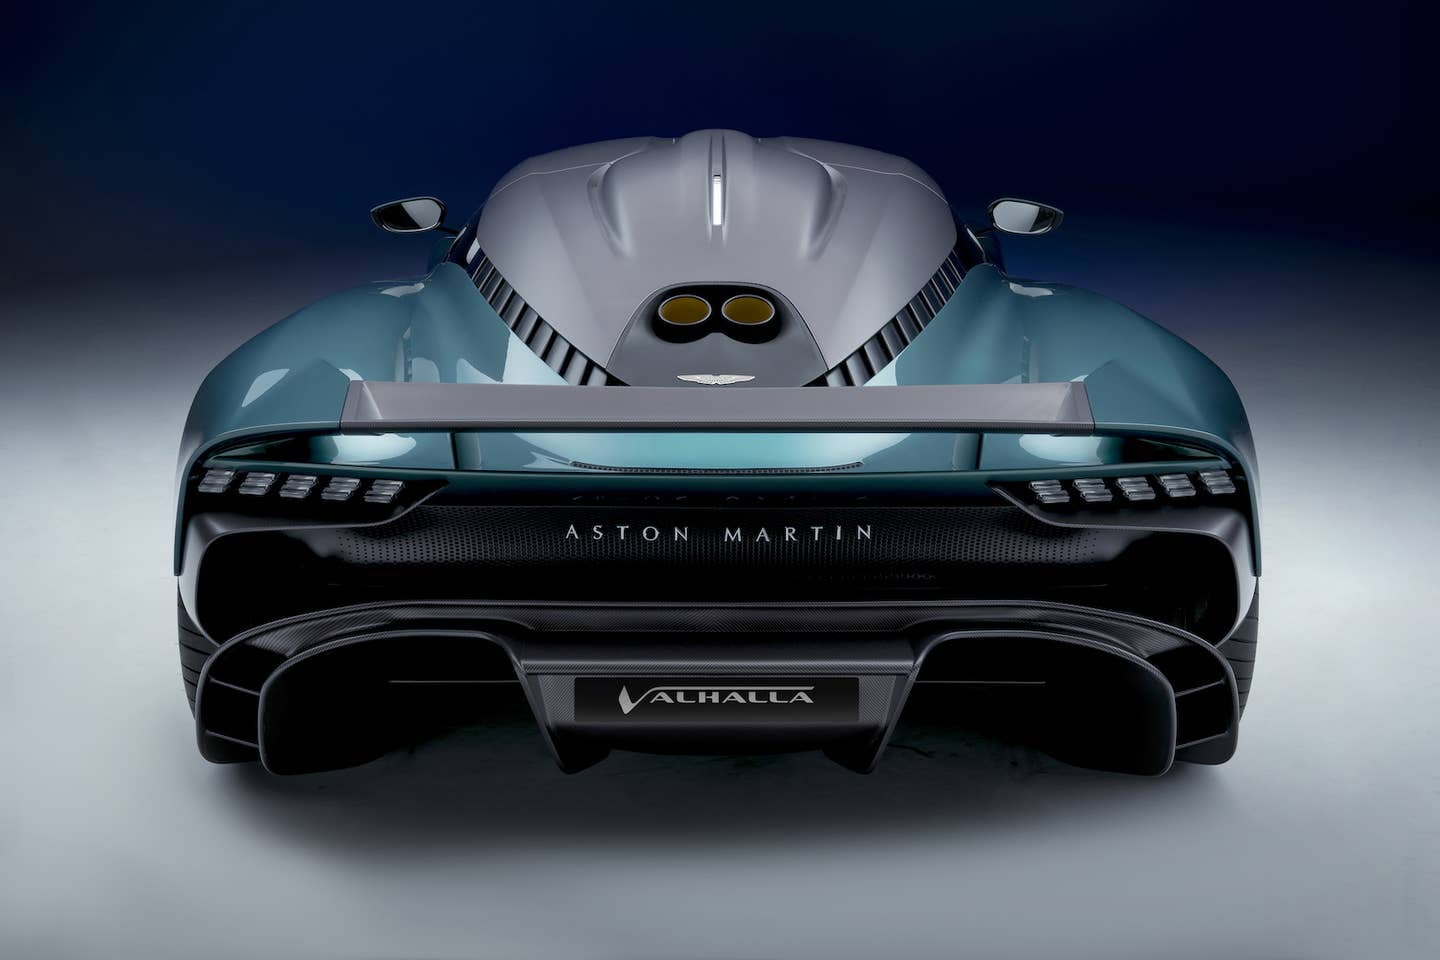 Aston Martin unveils its Valhalla from the next 007 film but it had to redesign Bond's prototype supercar from top to bottom to sell it